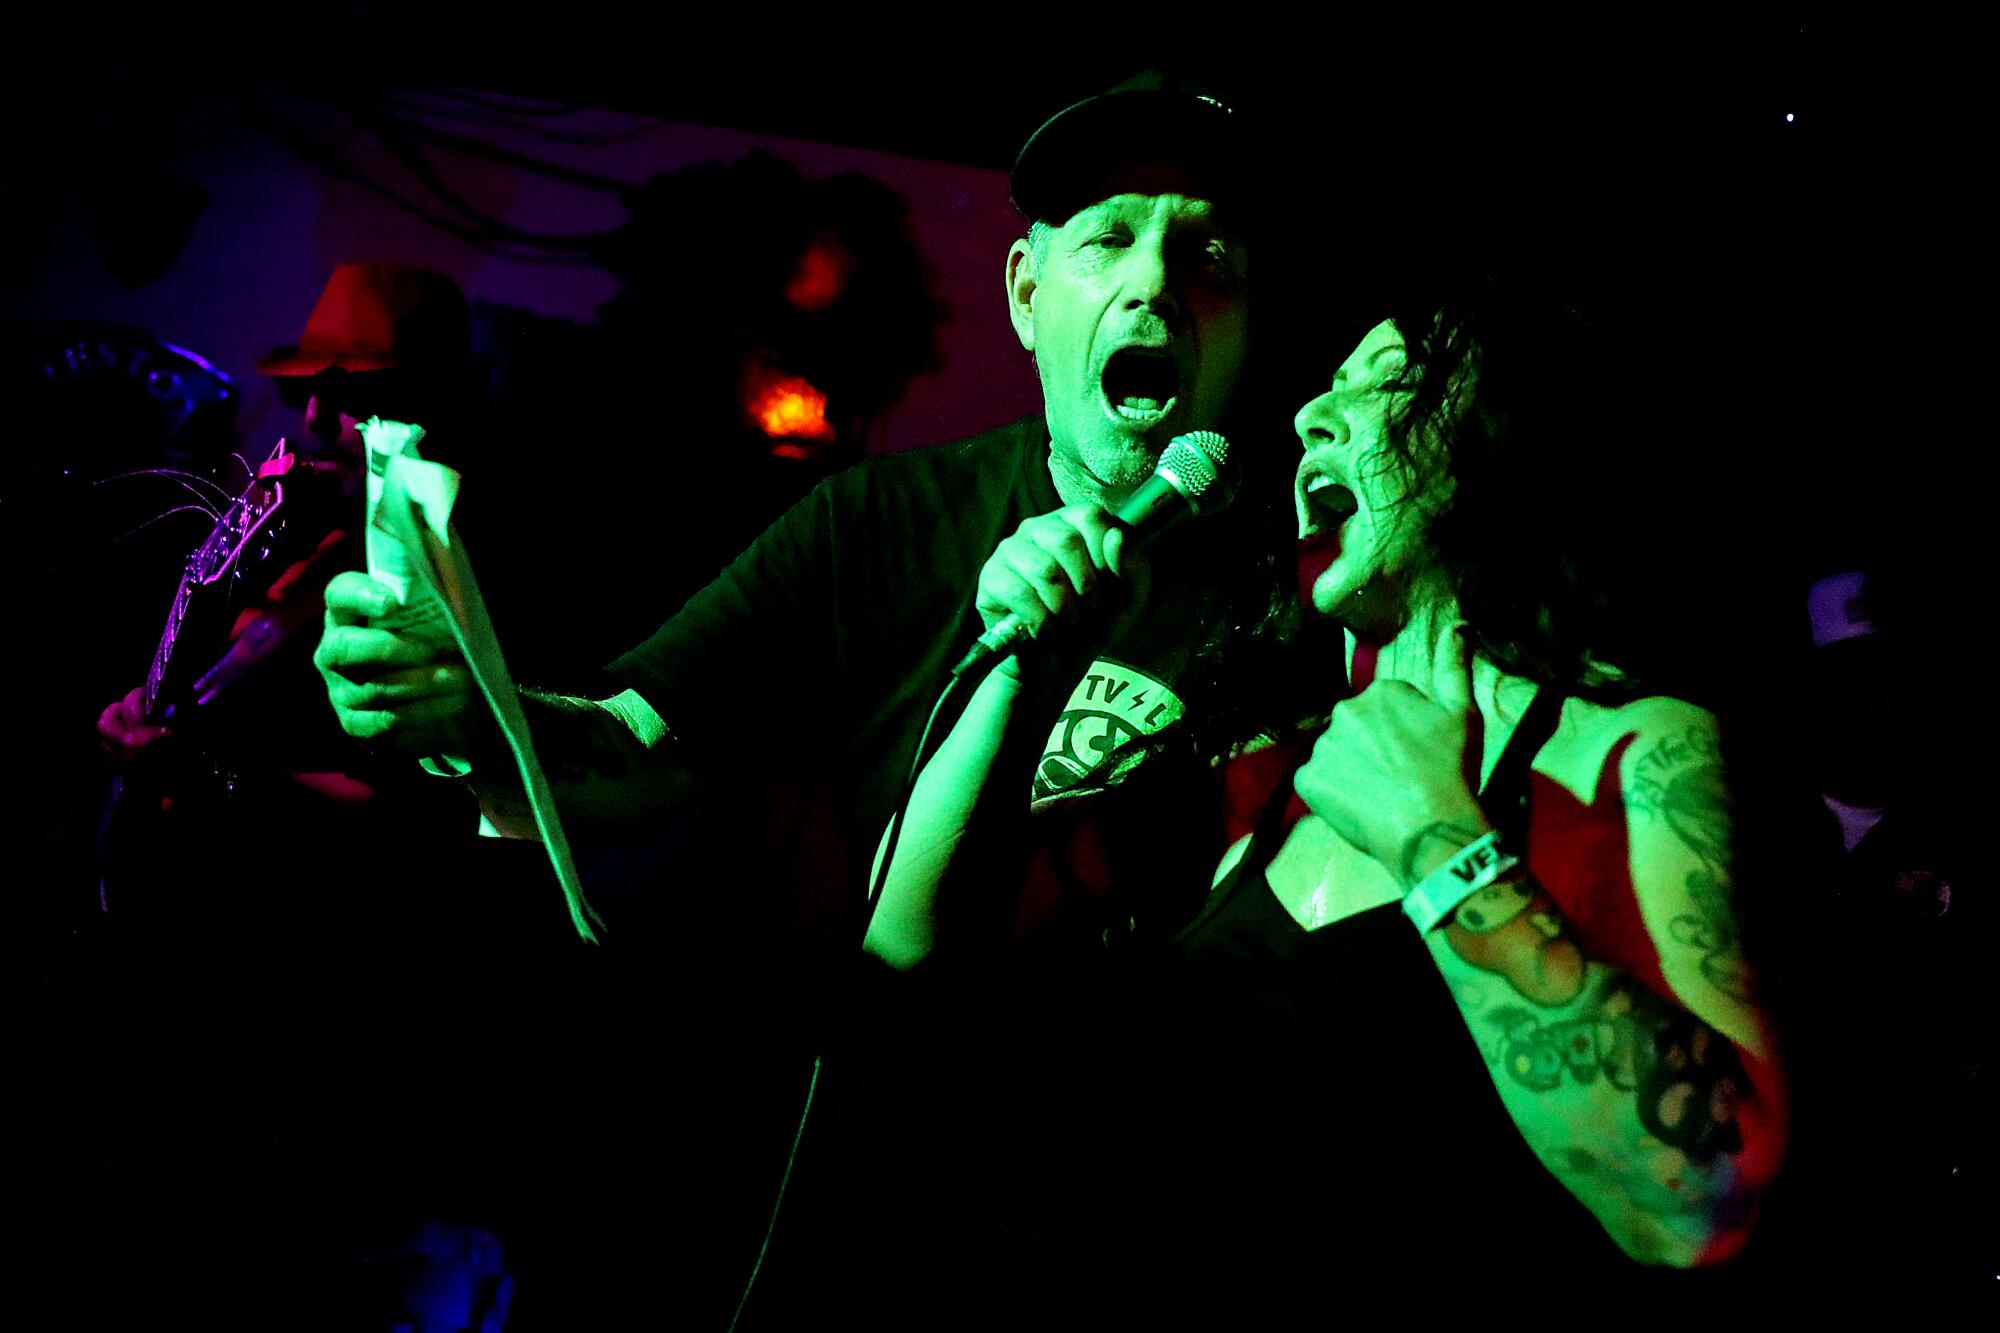 Two karaoke singers belt out a song in a dark lit room, under lights that make their skin appear to be green.